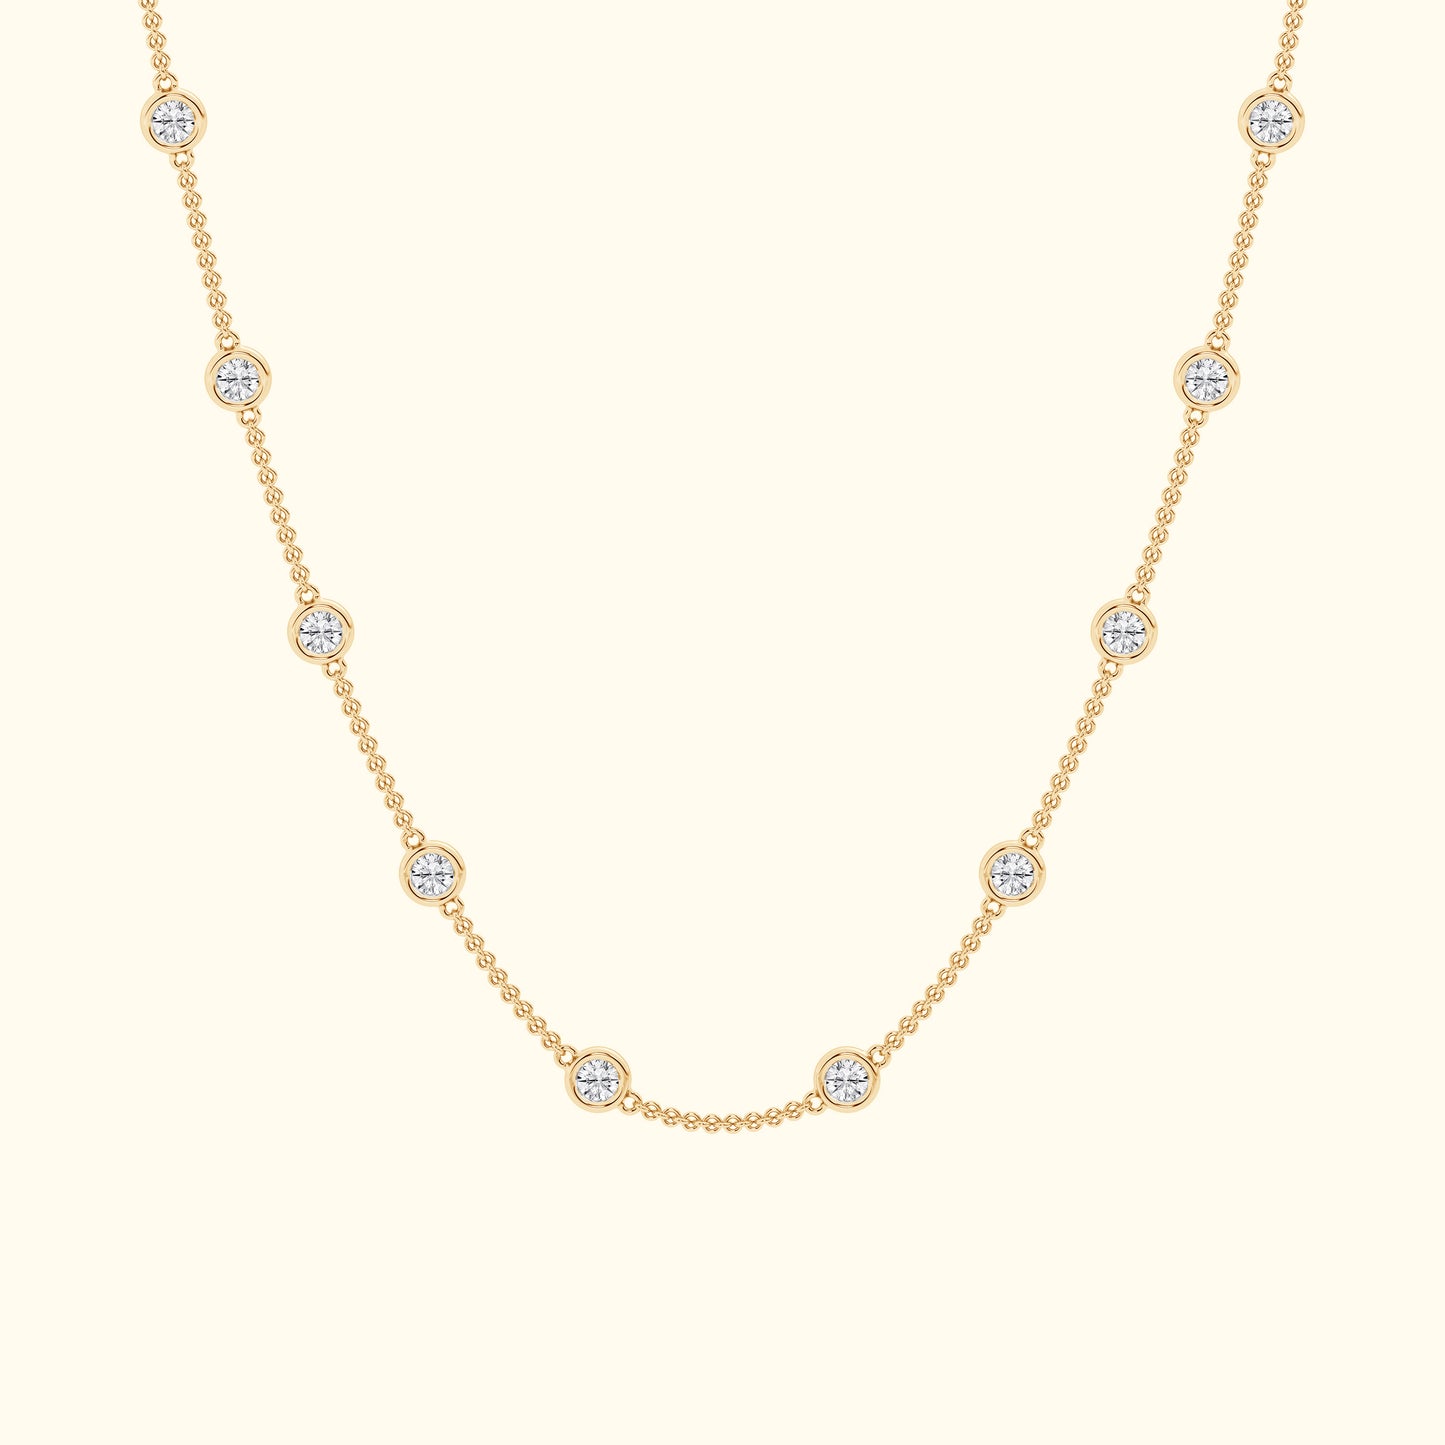 Diamonds By The Yard' Necklace in 14K Yellow Gold (3 ct. tw.)